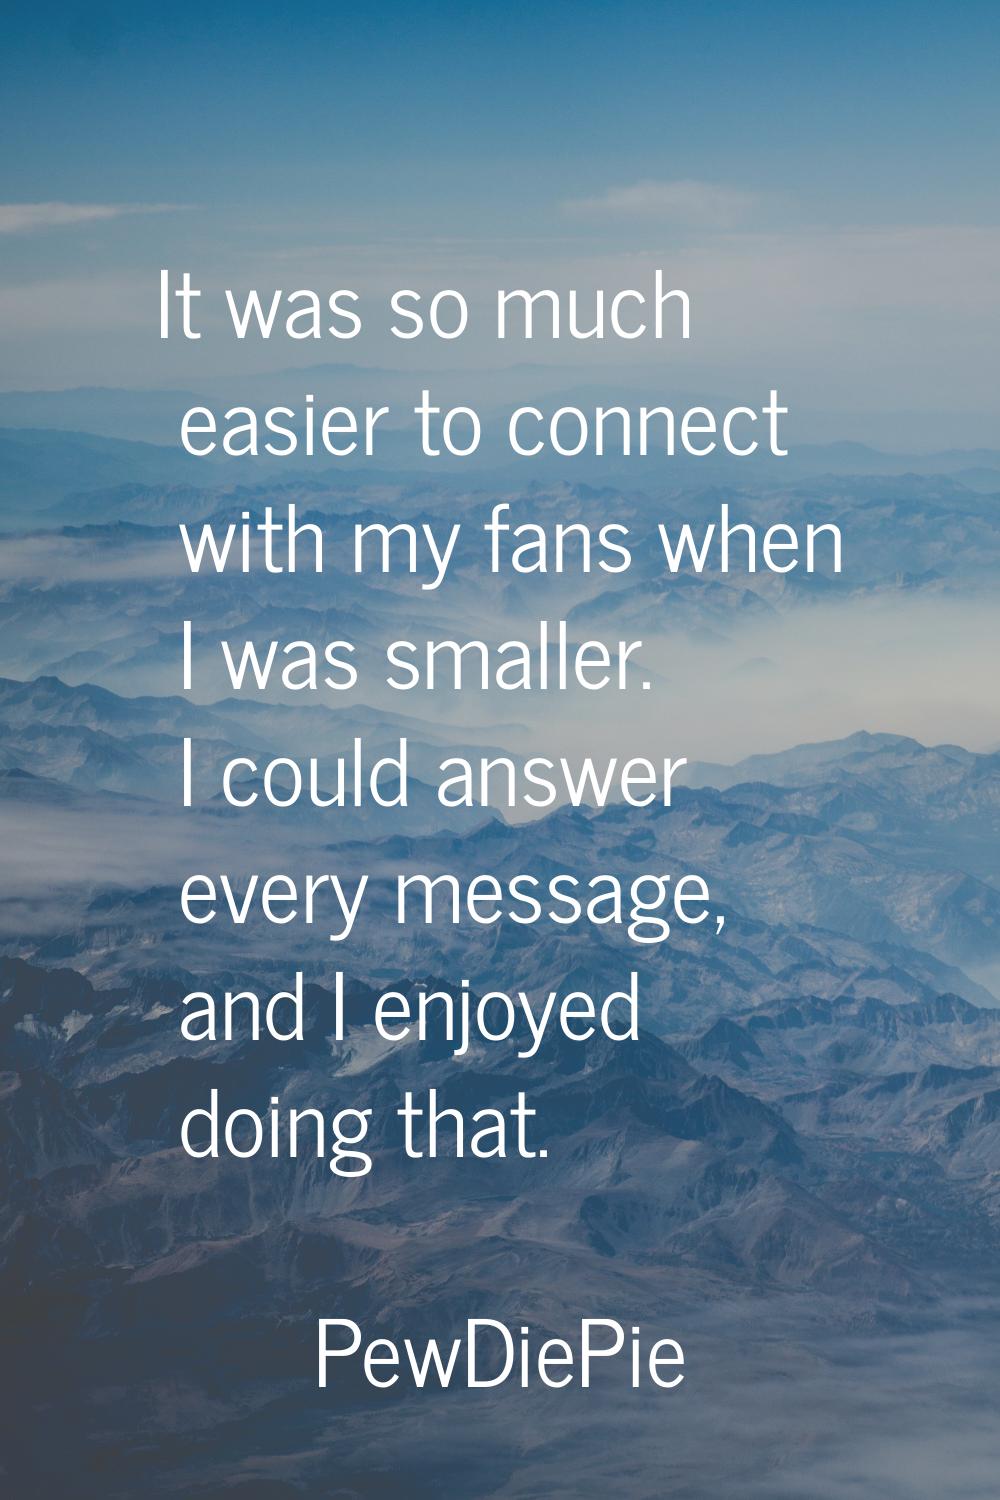 It was so much easier to connect with my fans when I was smaller. I could answer every message, and